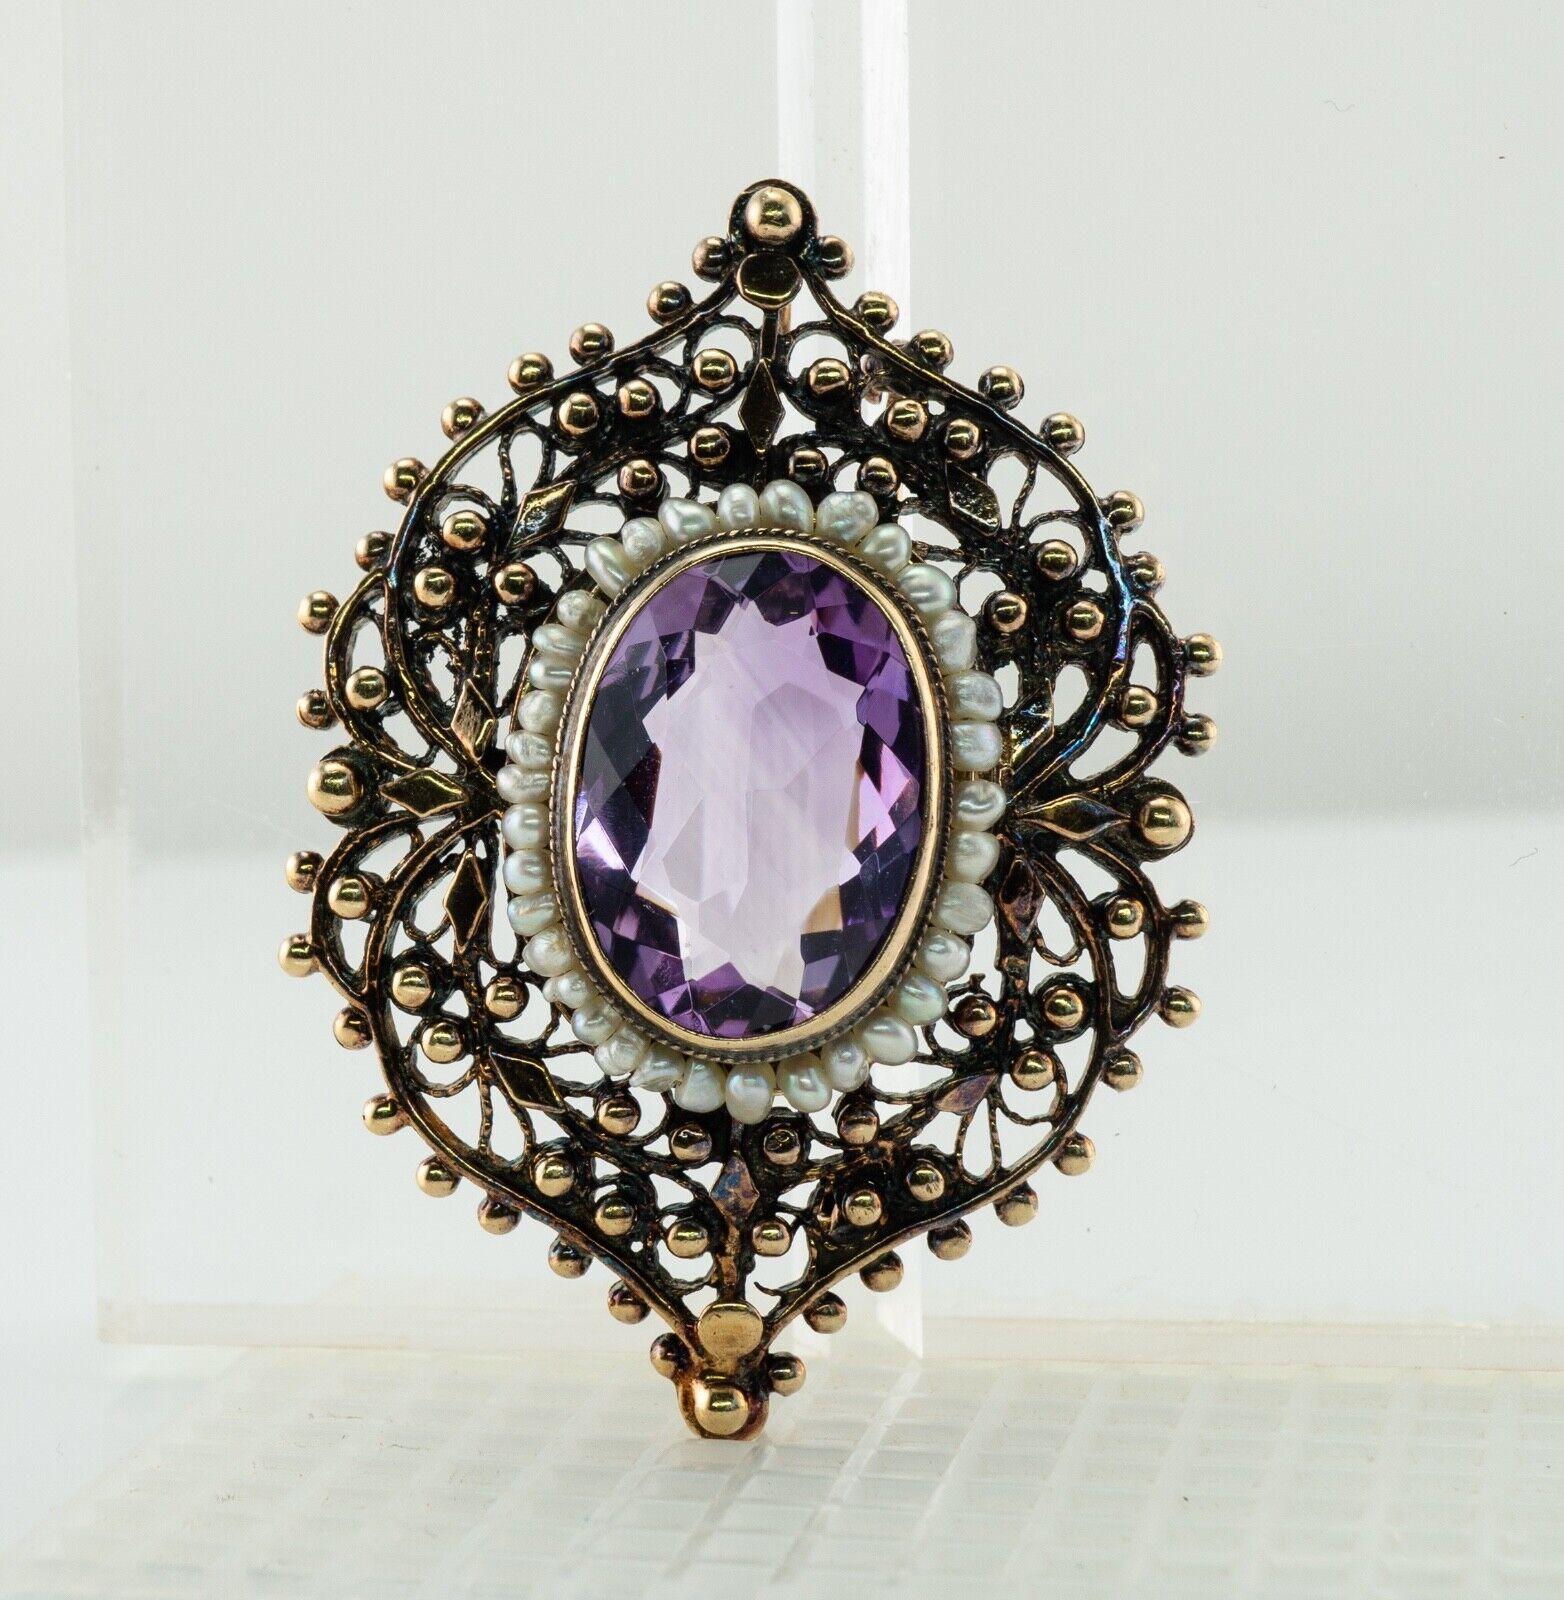 Pearl Amethyst Large Pendant Brooch 14K Gold Vintage

This one of a kind vintage pendant / brooch is finely crafted in solid 14K Yellow gold. The center absolutely stunning bezel set natural Earth mined Amethyst measures 17 x 12mm (about 12.20